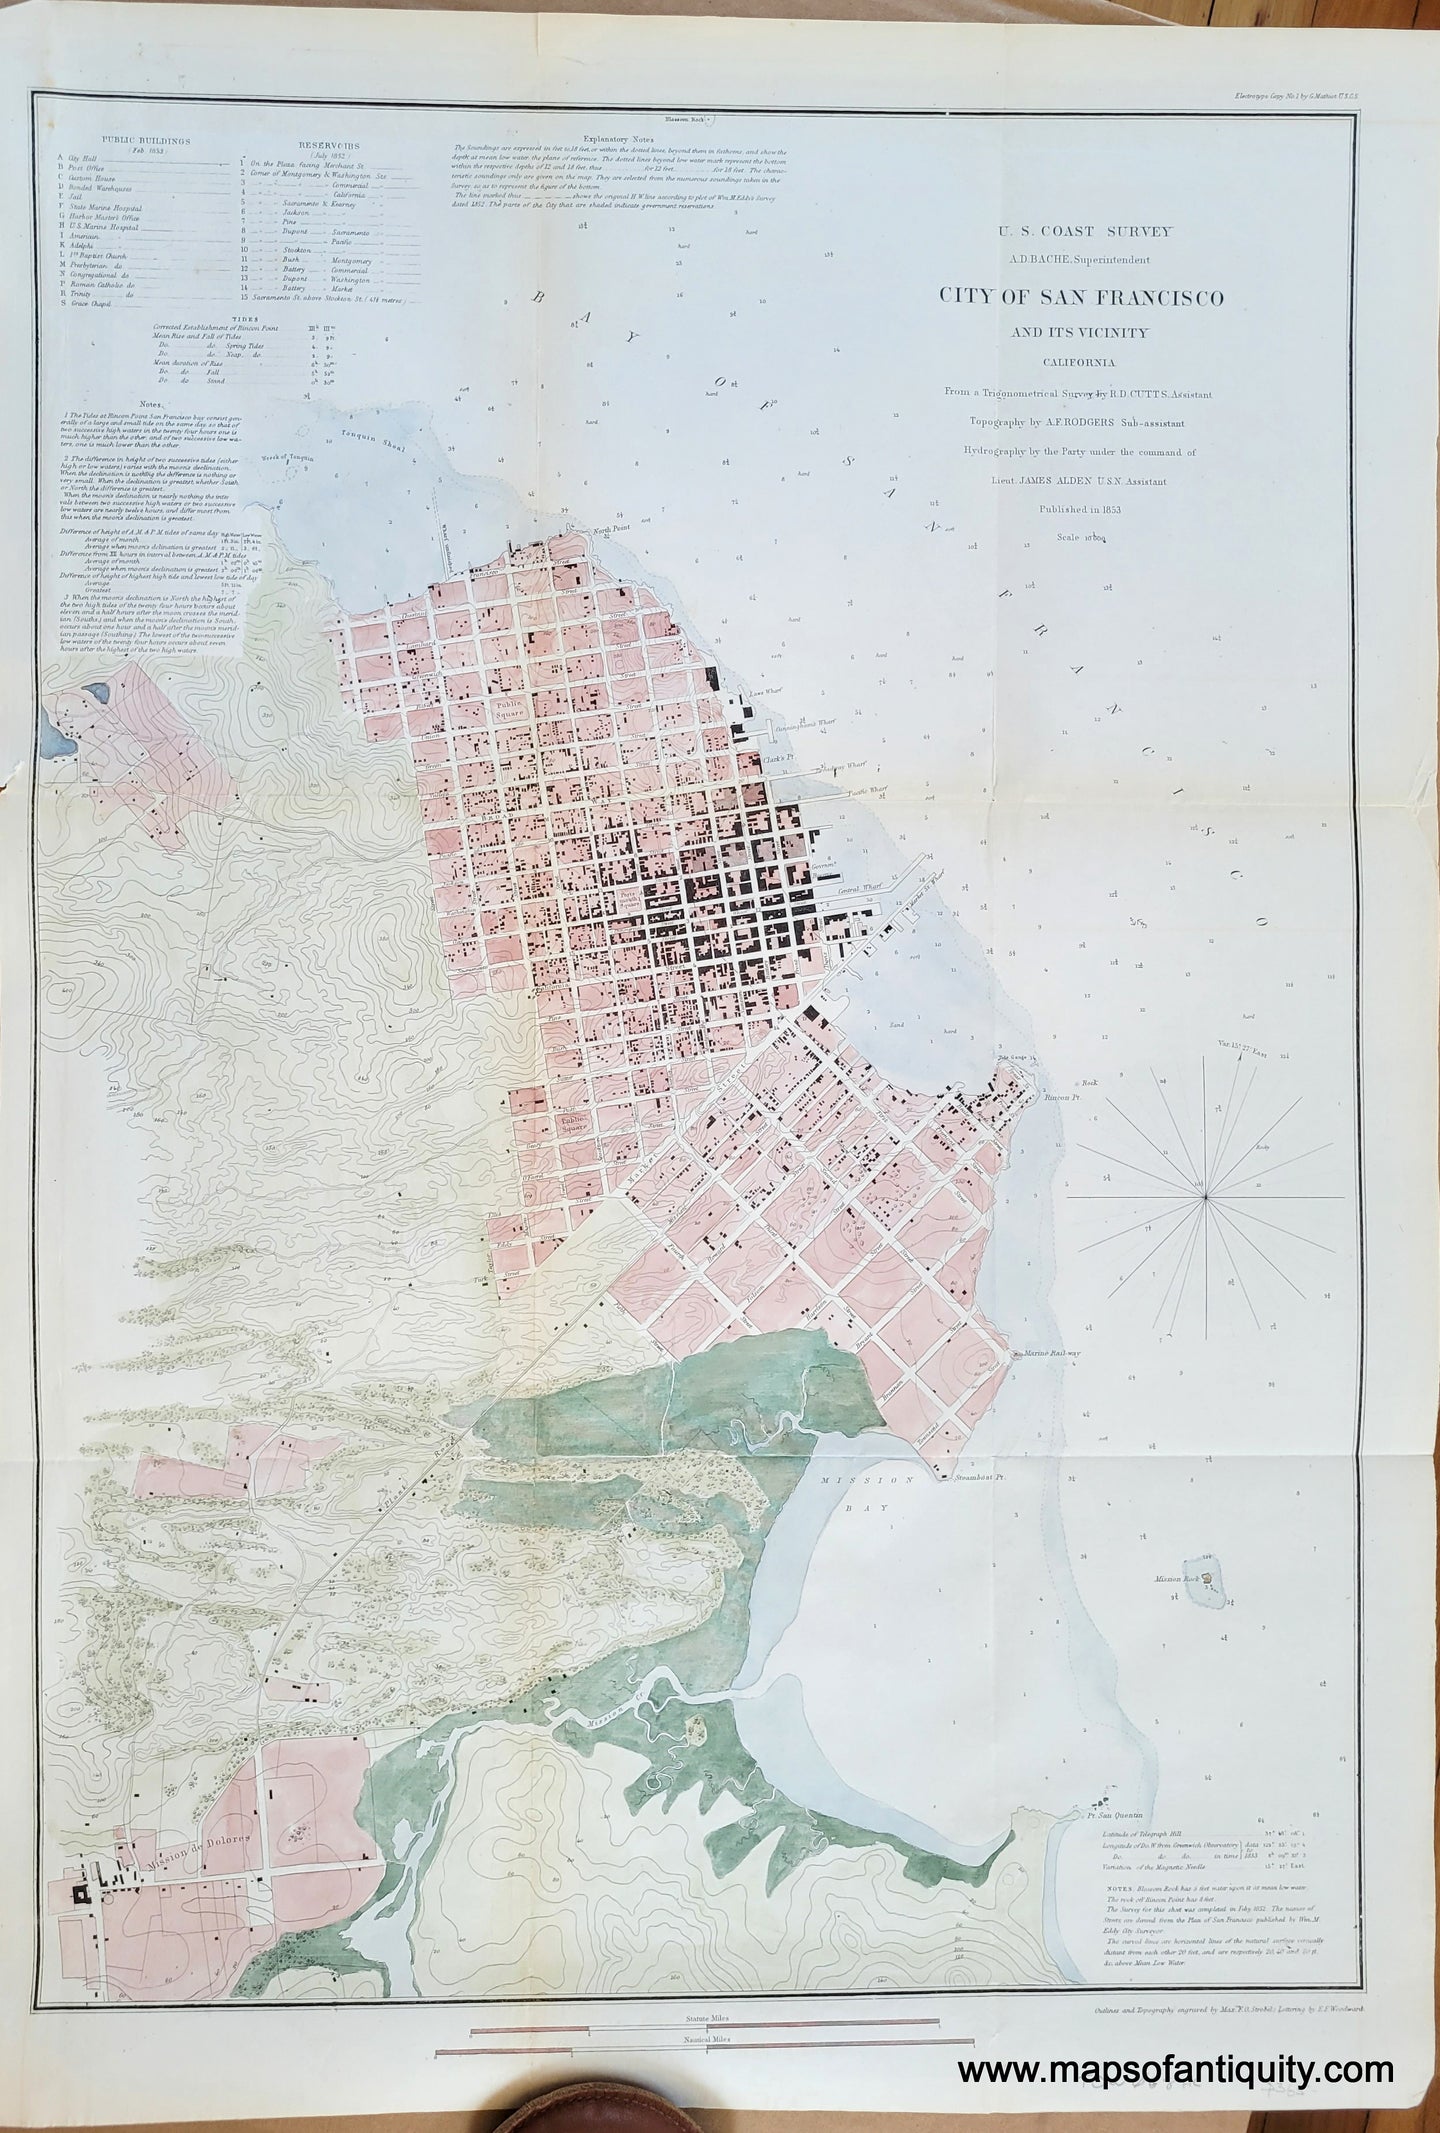 Antique-Hand-Colored-Map-and-Coastal-Chart-City-of-San-Francisco-and-Its-Vicinity-California**********-United-States-West-1853-U.S.-Coast-Survey-Maps-Of-Antiquity